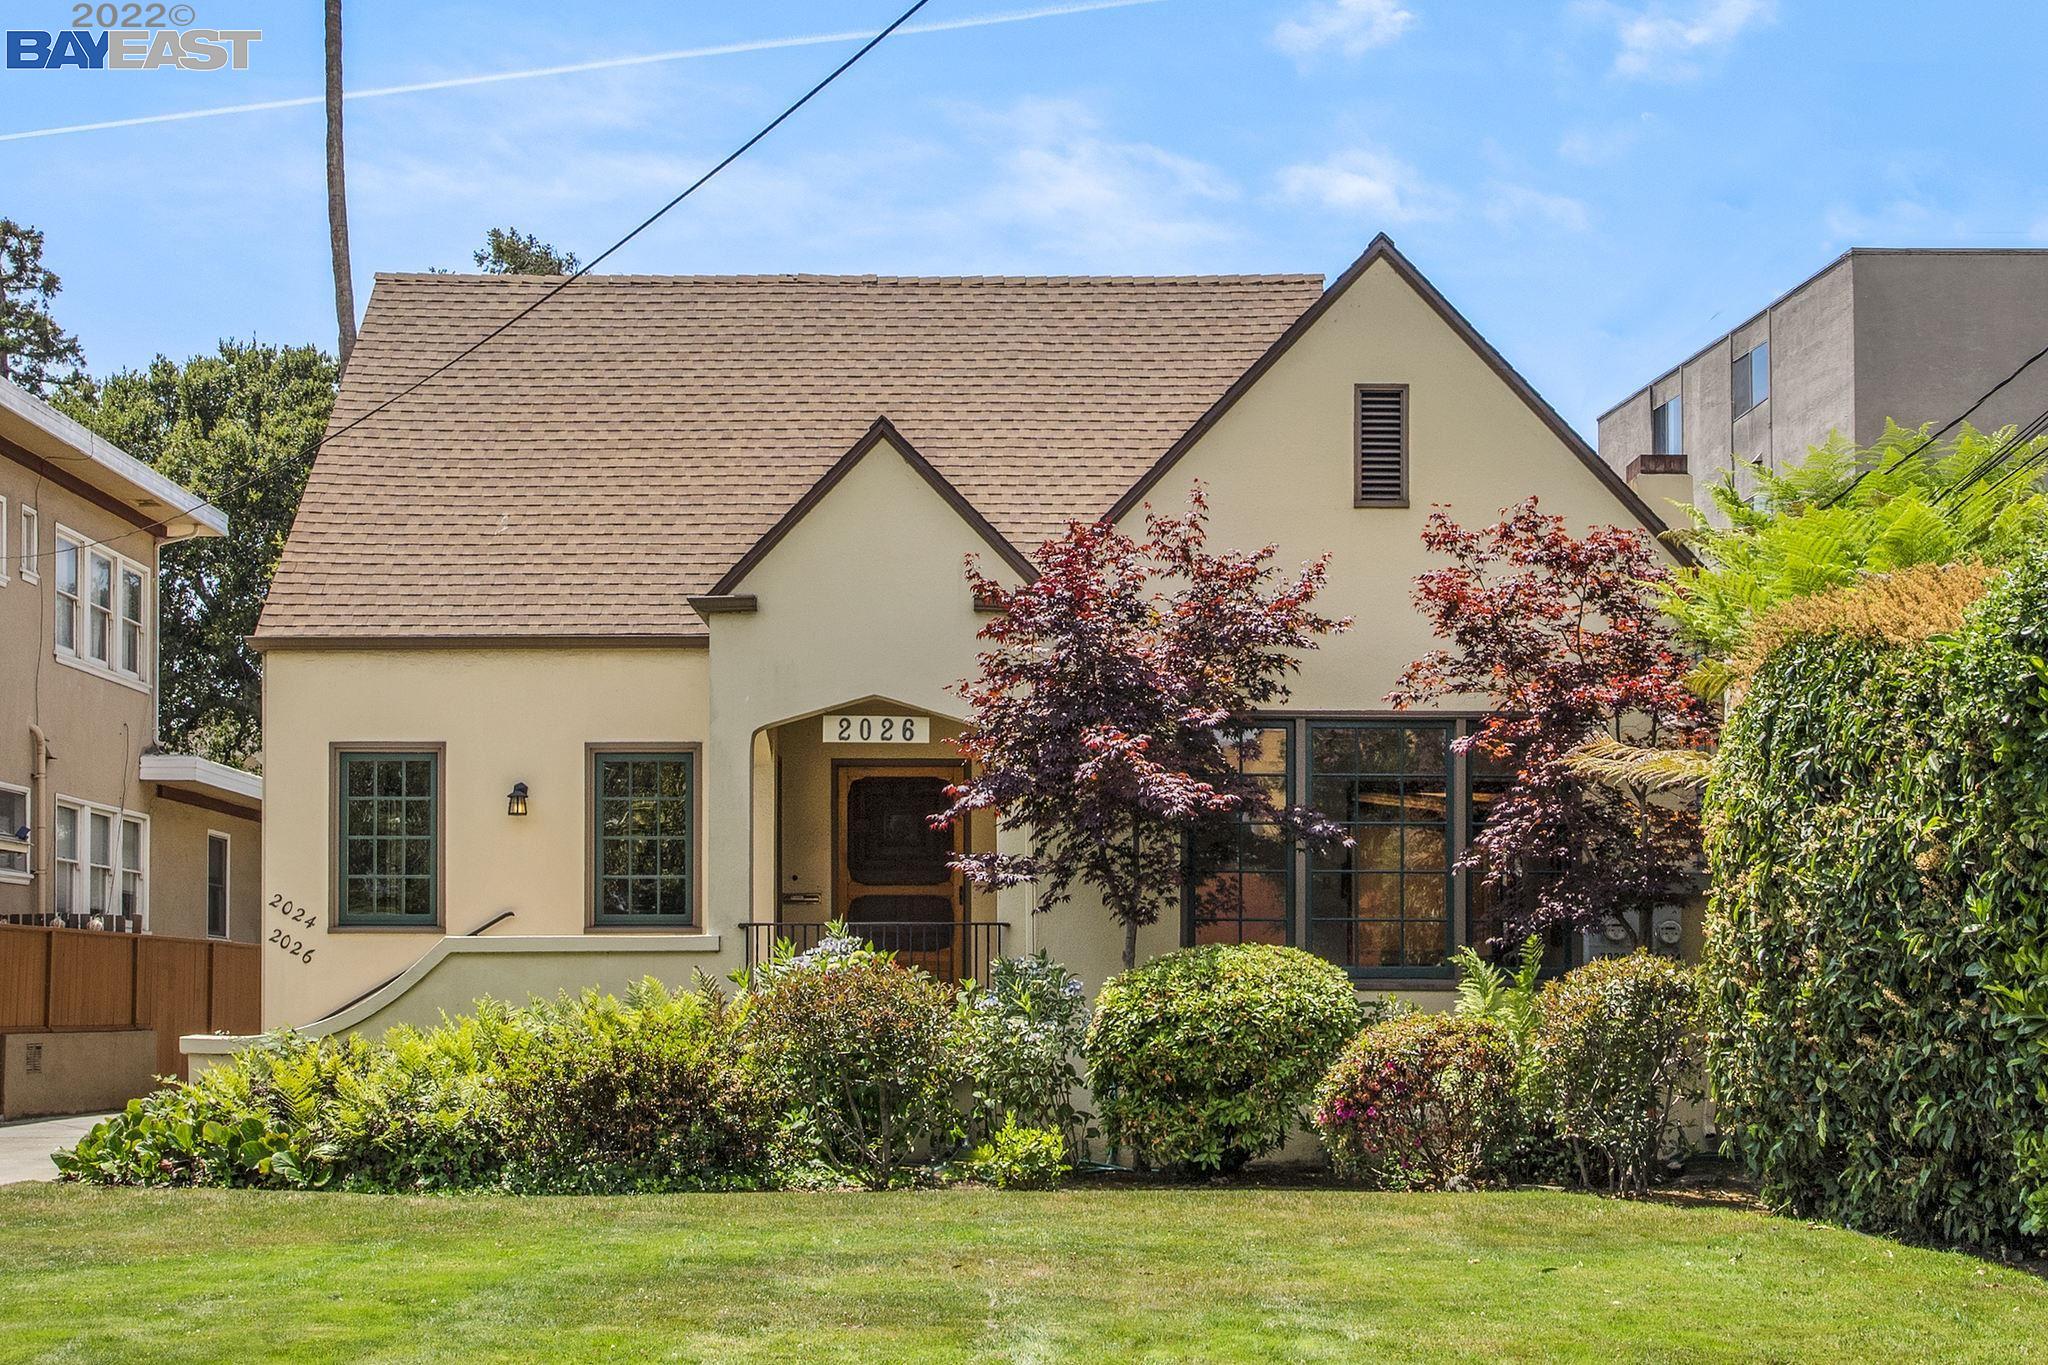 Tremendous opportunity! Live, work, rent, & possible ADU - all on a huge lot approx. 10,384 (twice the size of most Alameda lots). This classic, 1932 Tudor-Style home is set back from the street with a long driveway to the rear carports, 1+ Car garage, RV parking & more. The home and studio are approx. 2576 sf. Used as a dental office for 25+ years, the existing layout has 4BR’s, (2) half baths, a downstairs workroom, & large attic, w/ a separate rental studio apartment to offset your mortgage. The traditional formal living room has vaulted ceilings, original ornate fireplace surround, mahogany doors & trim, large picture window, & hardwood floors. A lattice-covered redwood deck off the upper bedrooms extends across the rear of the home and leads to a lovely backyard with oak trees, roses, & jasmine. Make this one your dream home! An application has been submitted to the city to reconfigure the home to a 3BR/3.5BA home with 2 primary suites, a gorgeous, open kitchen + a new ADU.